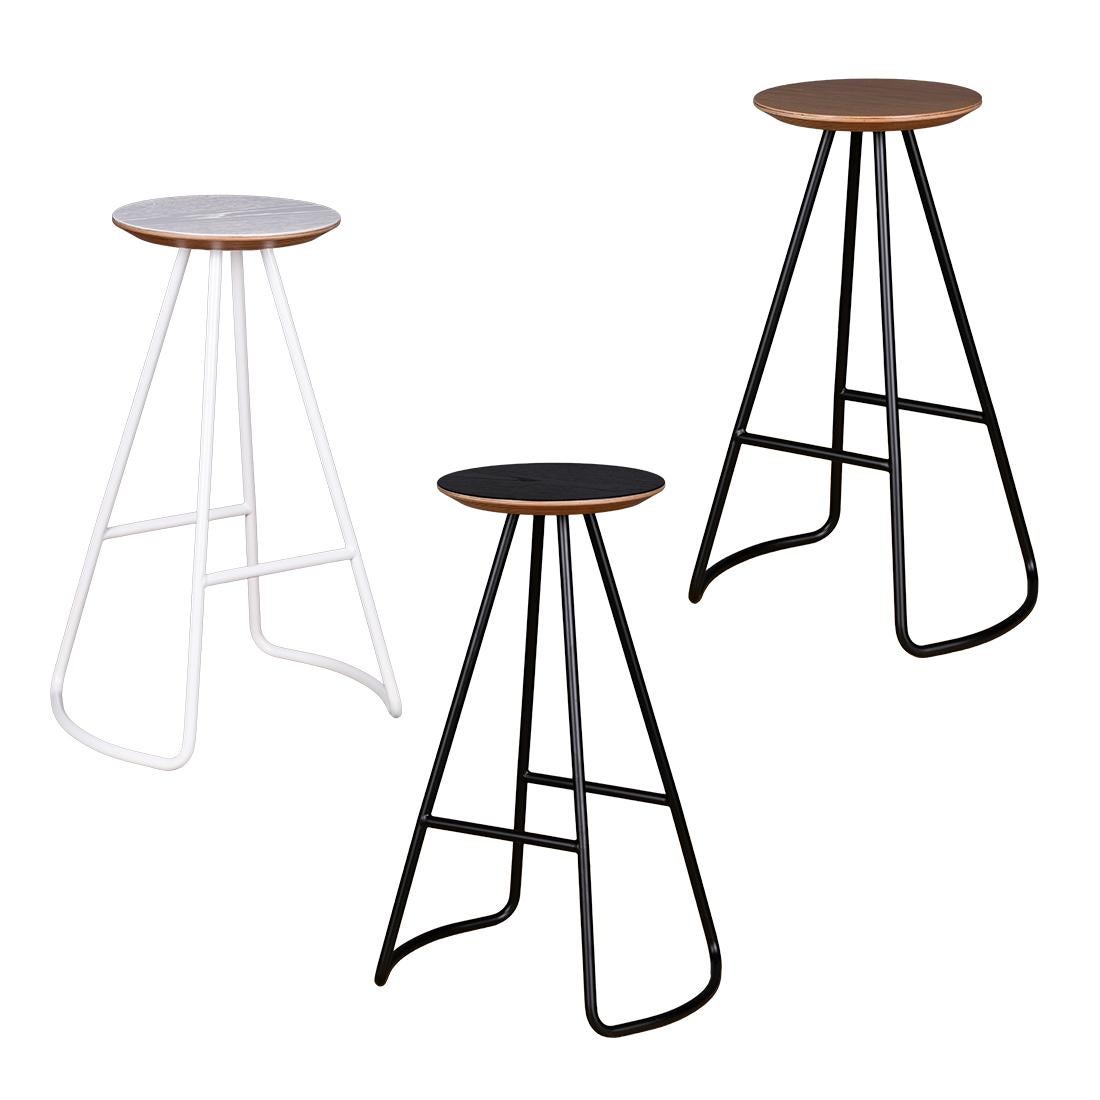 Painted Sama High Stool, Contemporary Modern Minimalist Natural Oak & White Metal For Sale